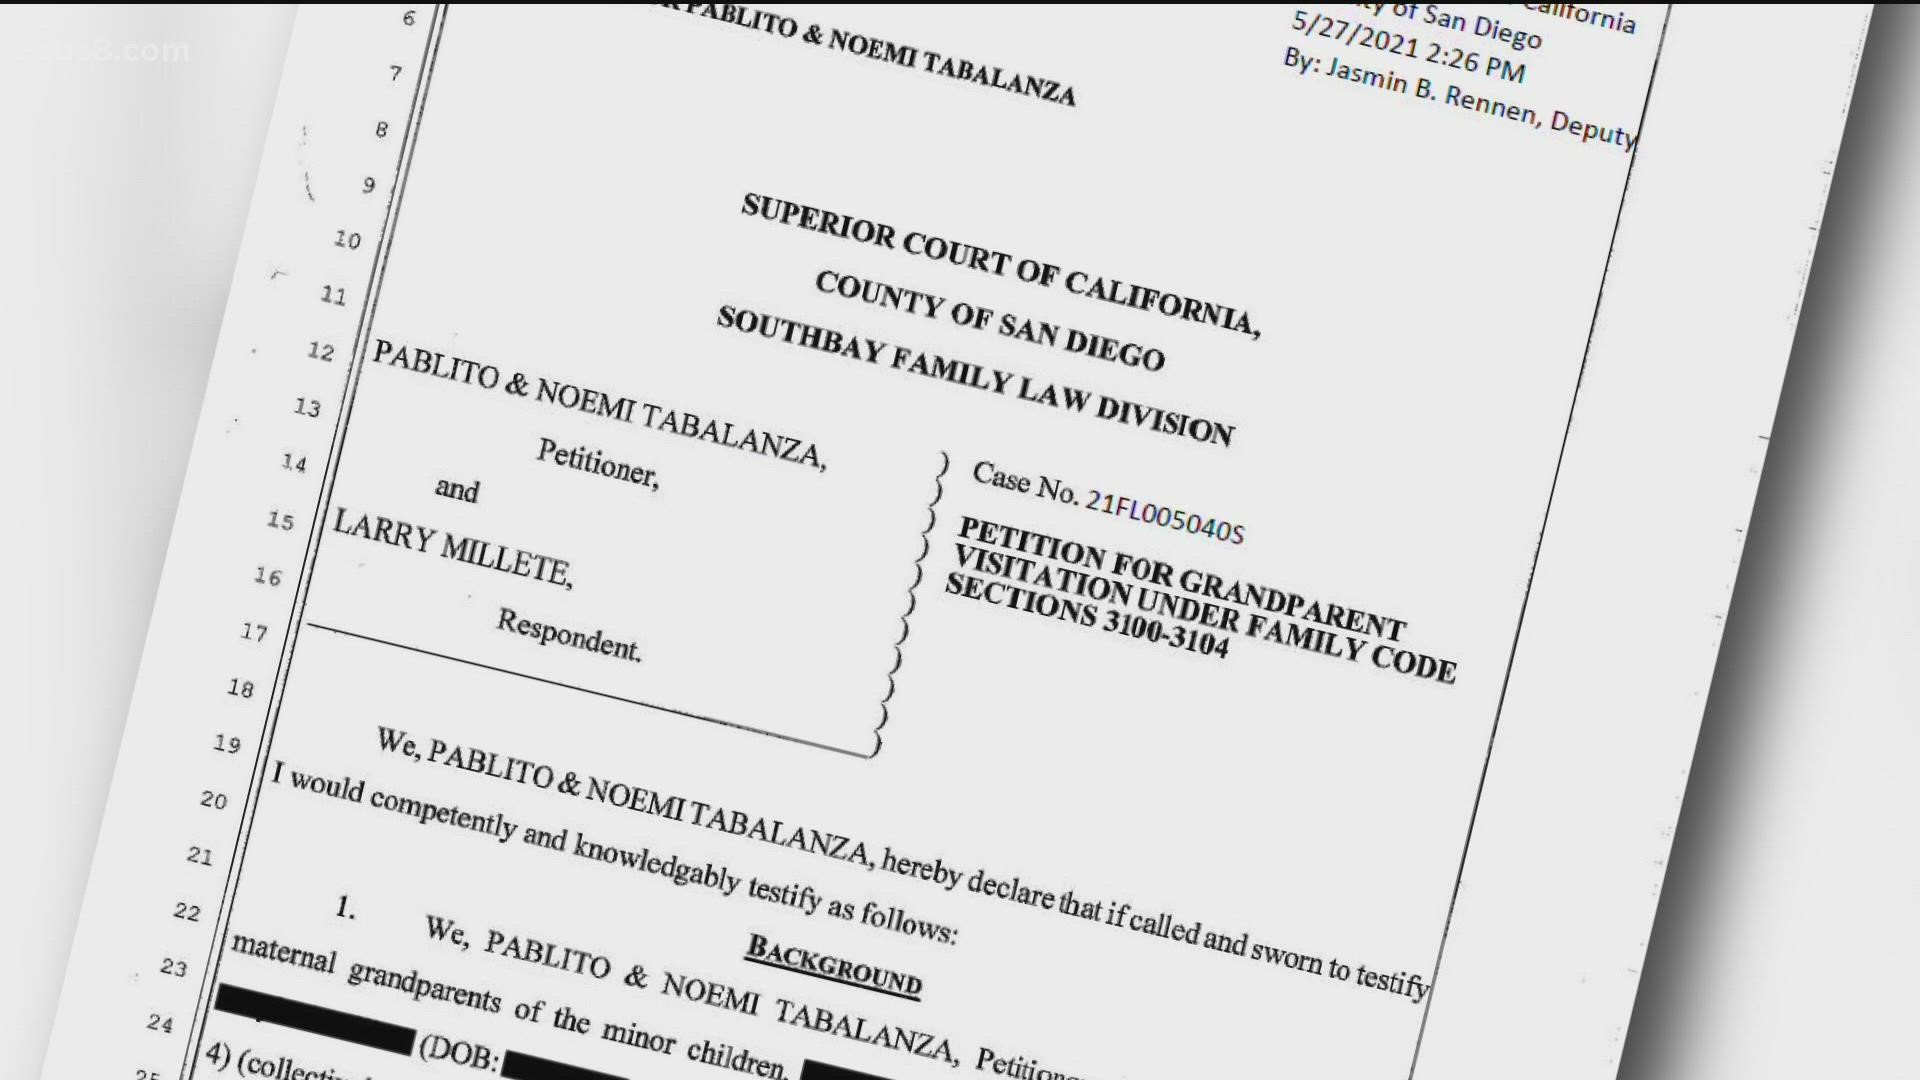 During the hearing the judge changed the visitation rules saying the maternal relatives can have the children visit them in Riverside County.